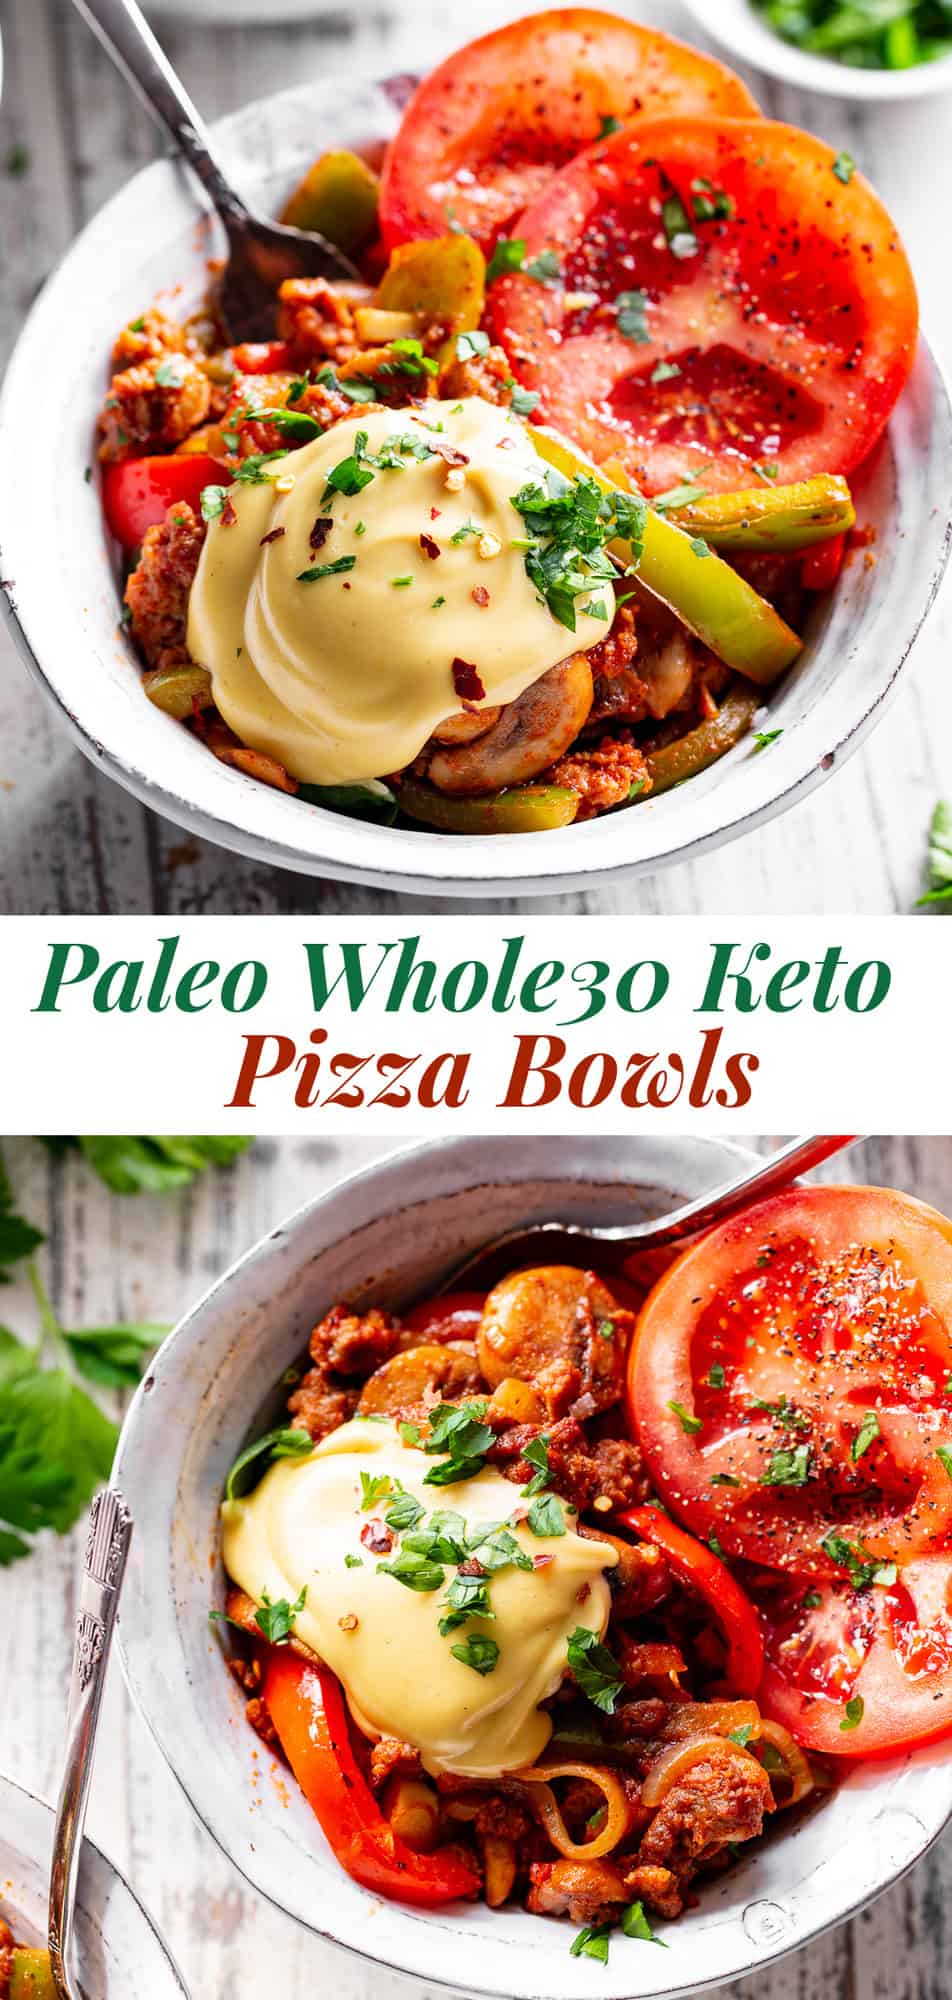 It's everything you love about pizza, deconstructed and served in a bowl!  These paleo pizza bowls are loaded with Italian sausage, veggies, and pizza sauce, then topped with a dairy free cheese sauce that's so tasty it's addicting!  These pizza bowls are Whole30 compliant, low in carbs, and you can use whatever "toppings" suit your taste.  Quick and easy, perfect for weeknights, filling and healthy. #paleo #whole30 #cleaneating #lowcarb #keto